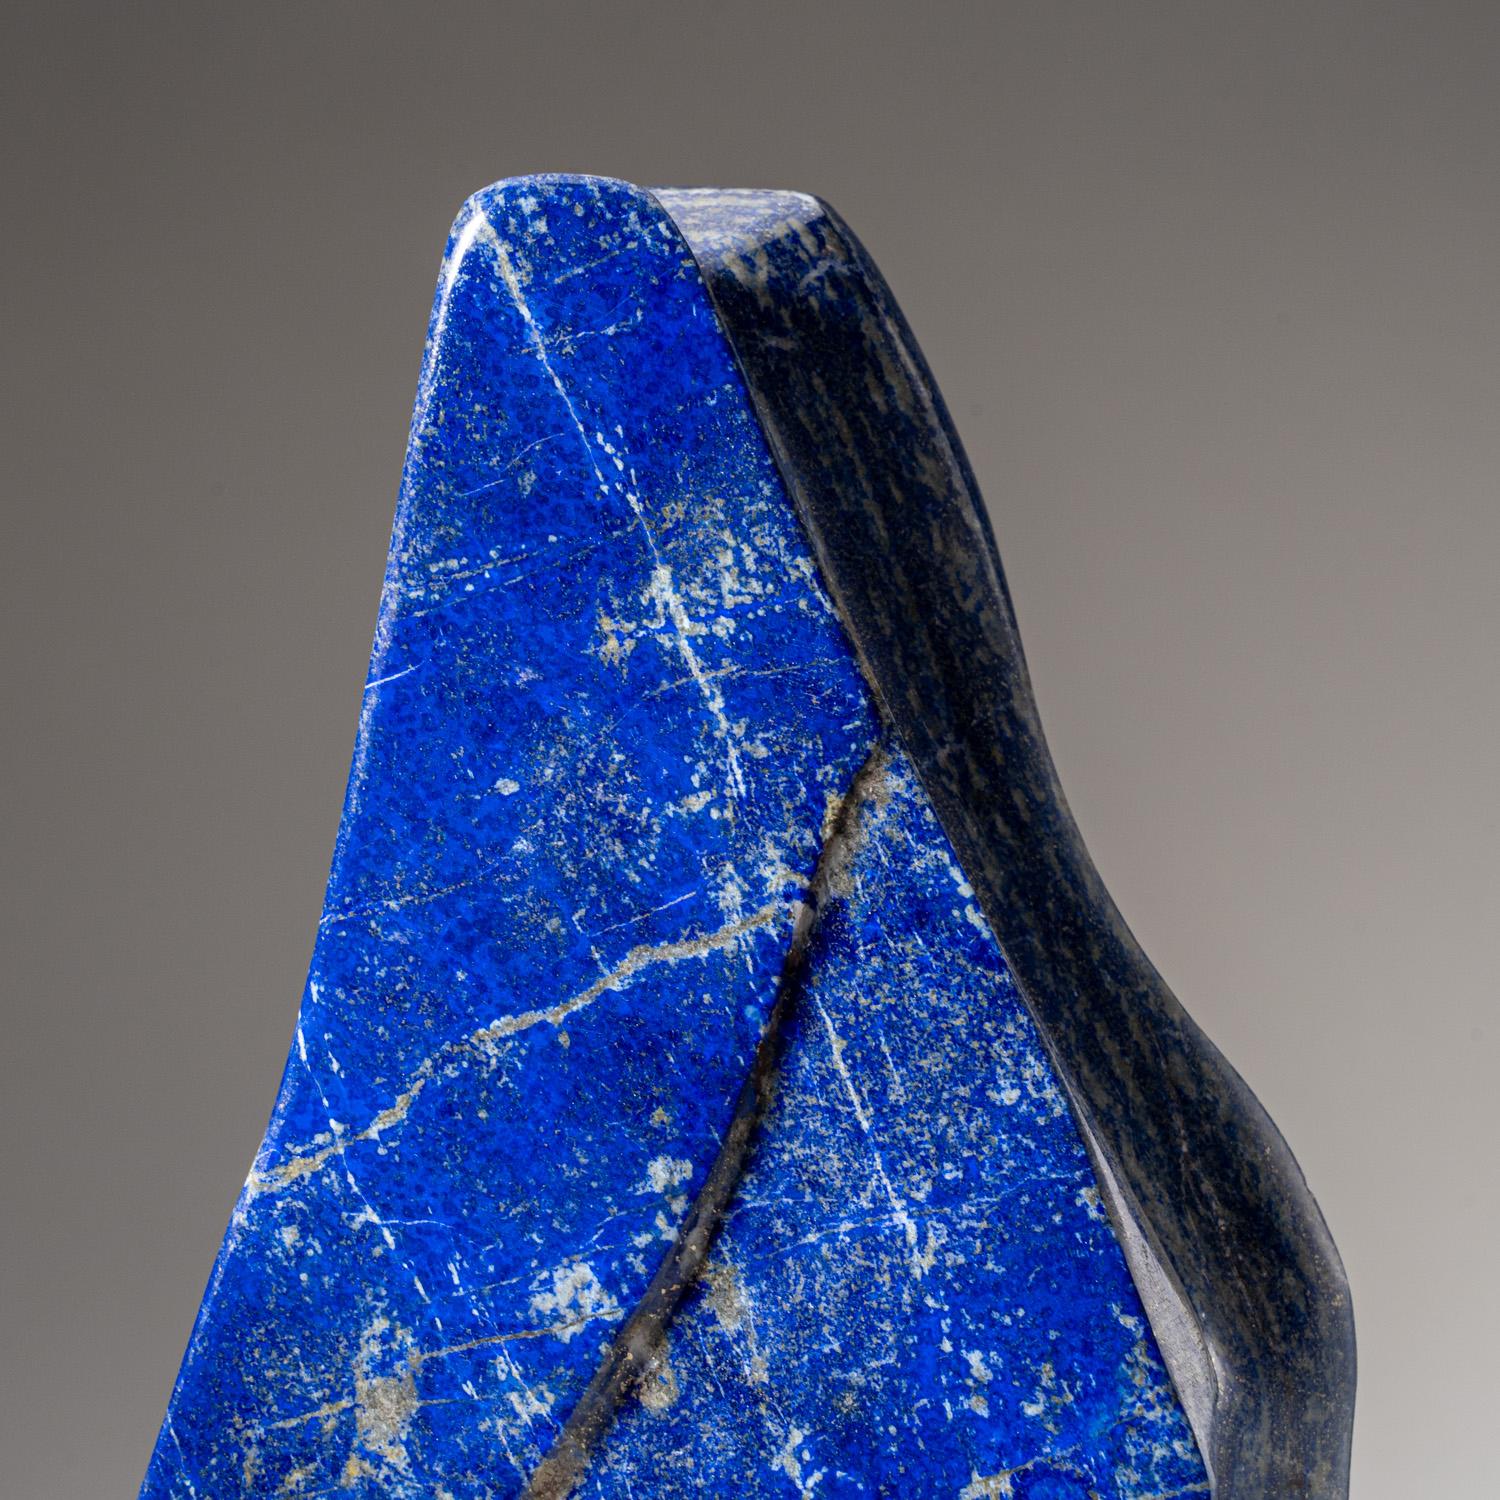 Crystal Polished Lapis Lazuli Freeform from Afghanistan (7.4 lbs) For Sale